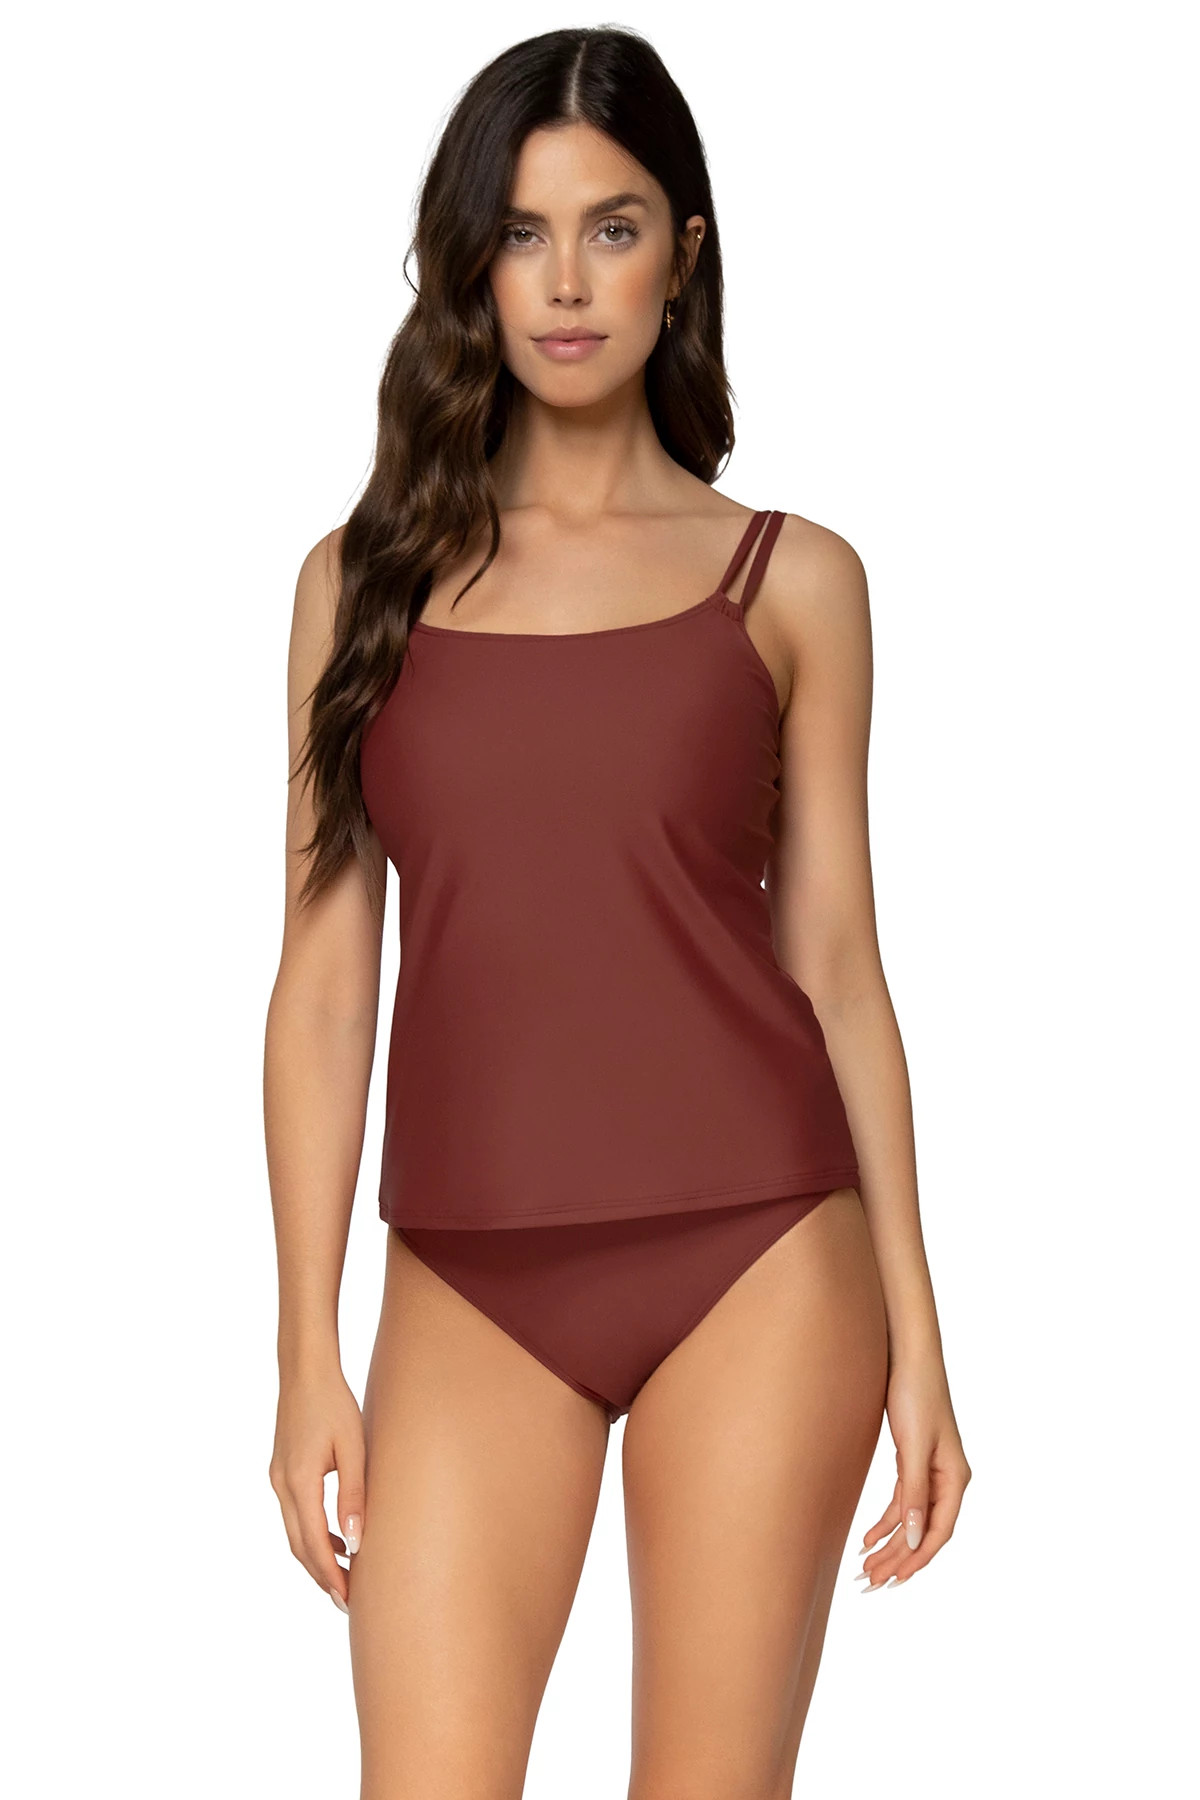 TUSCAN RED Taylor Underwire Bra Tankini Top (E-H Cup) image number 1